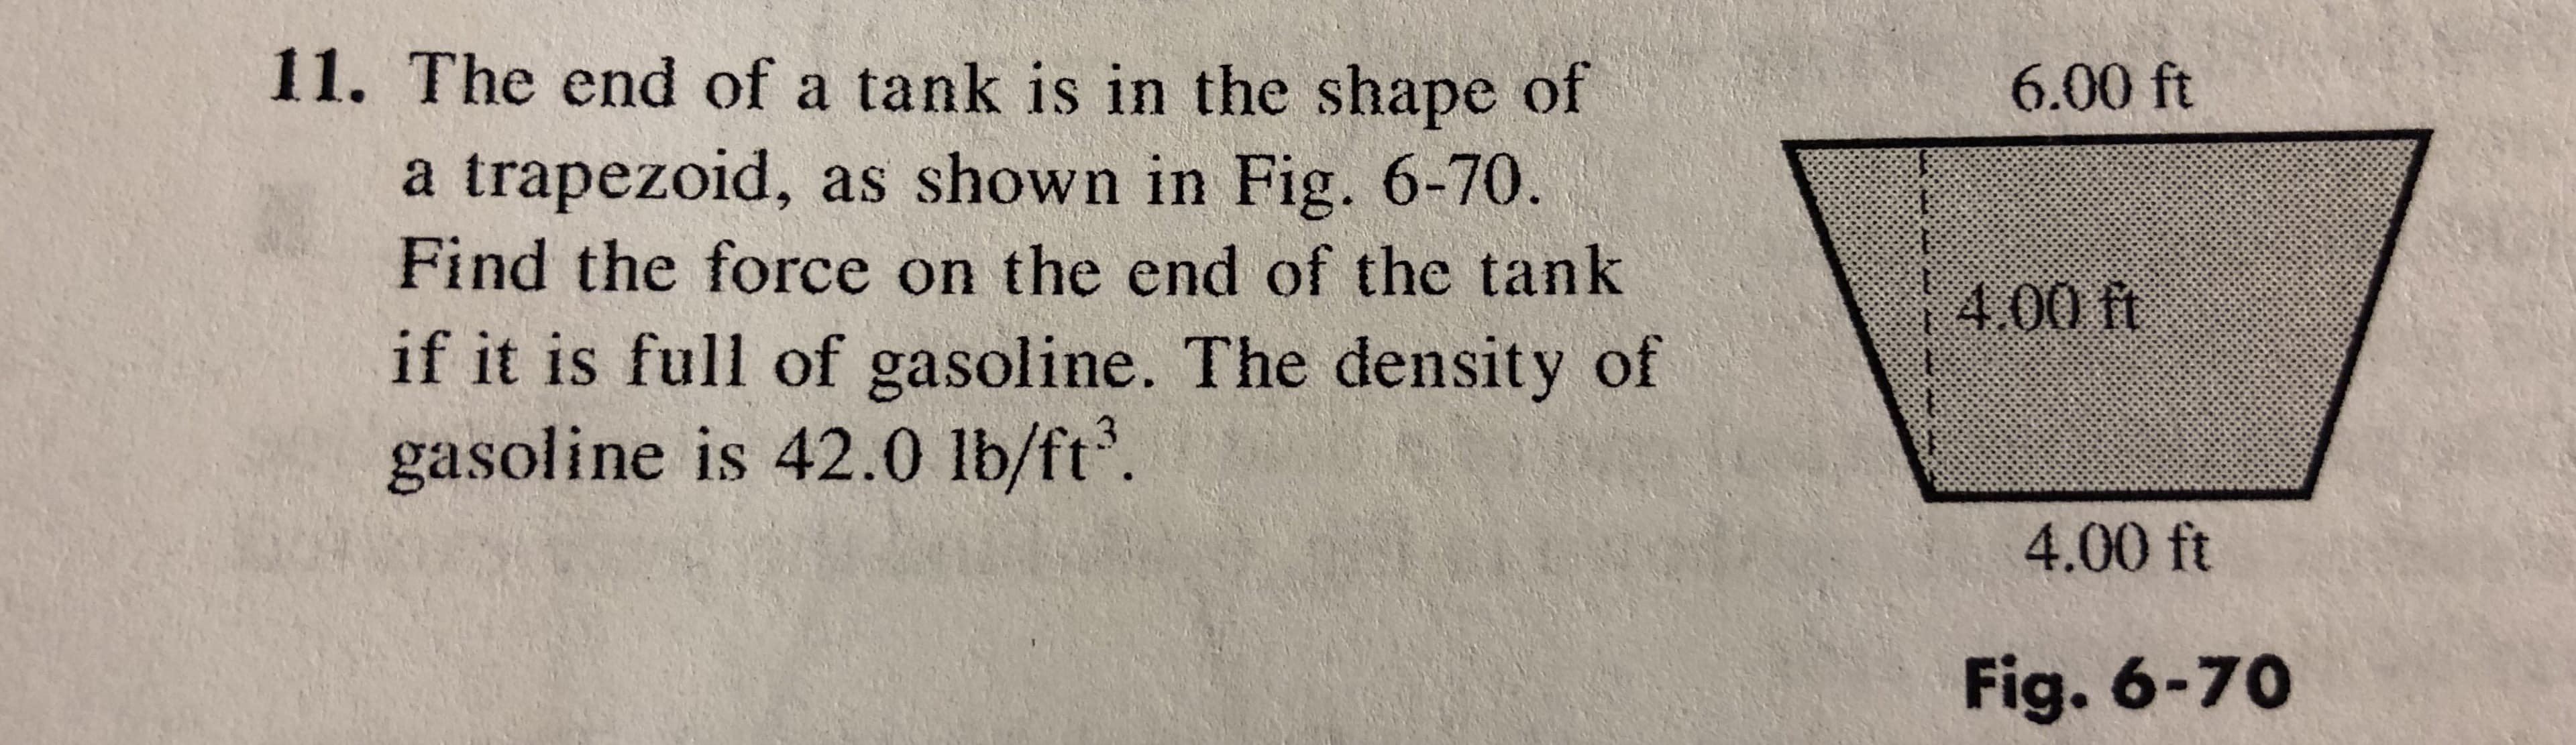 11. The end of a tank is in the shape of
6.00 ft
a trapezoid, as shown in Fig. 6-70
Find the force on the end of the tank
if it is full of gasoline. The density of
gasoline is 42.0 lb/ft3.
00 tt
4.00 ft
Fig. 6-70
